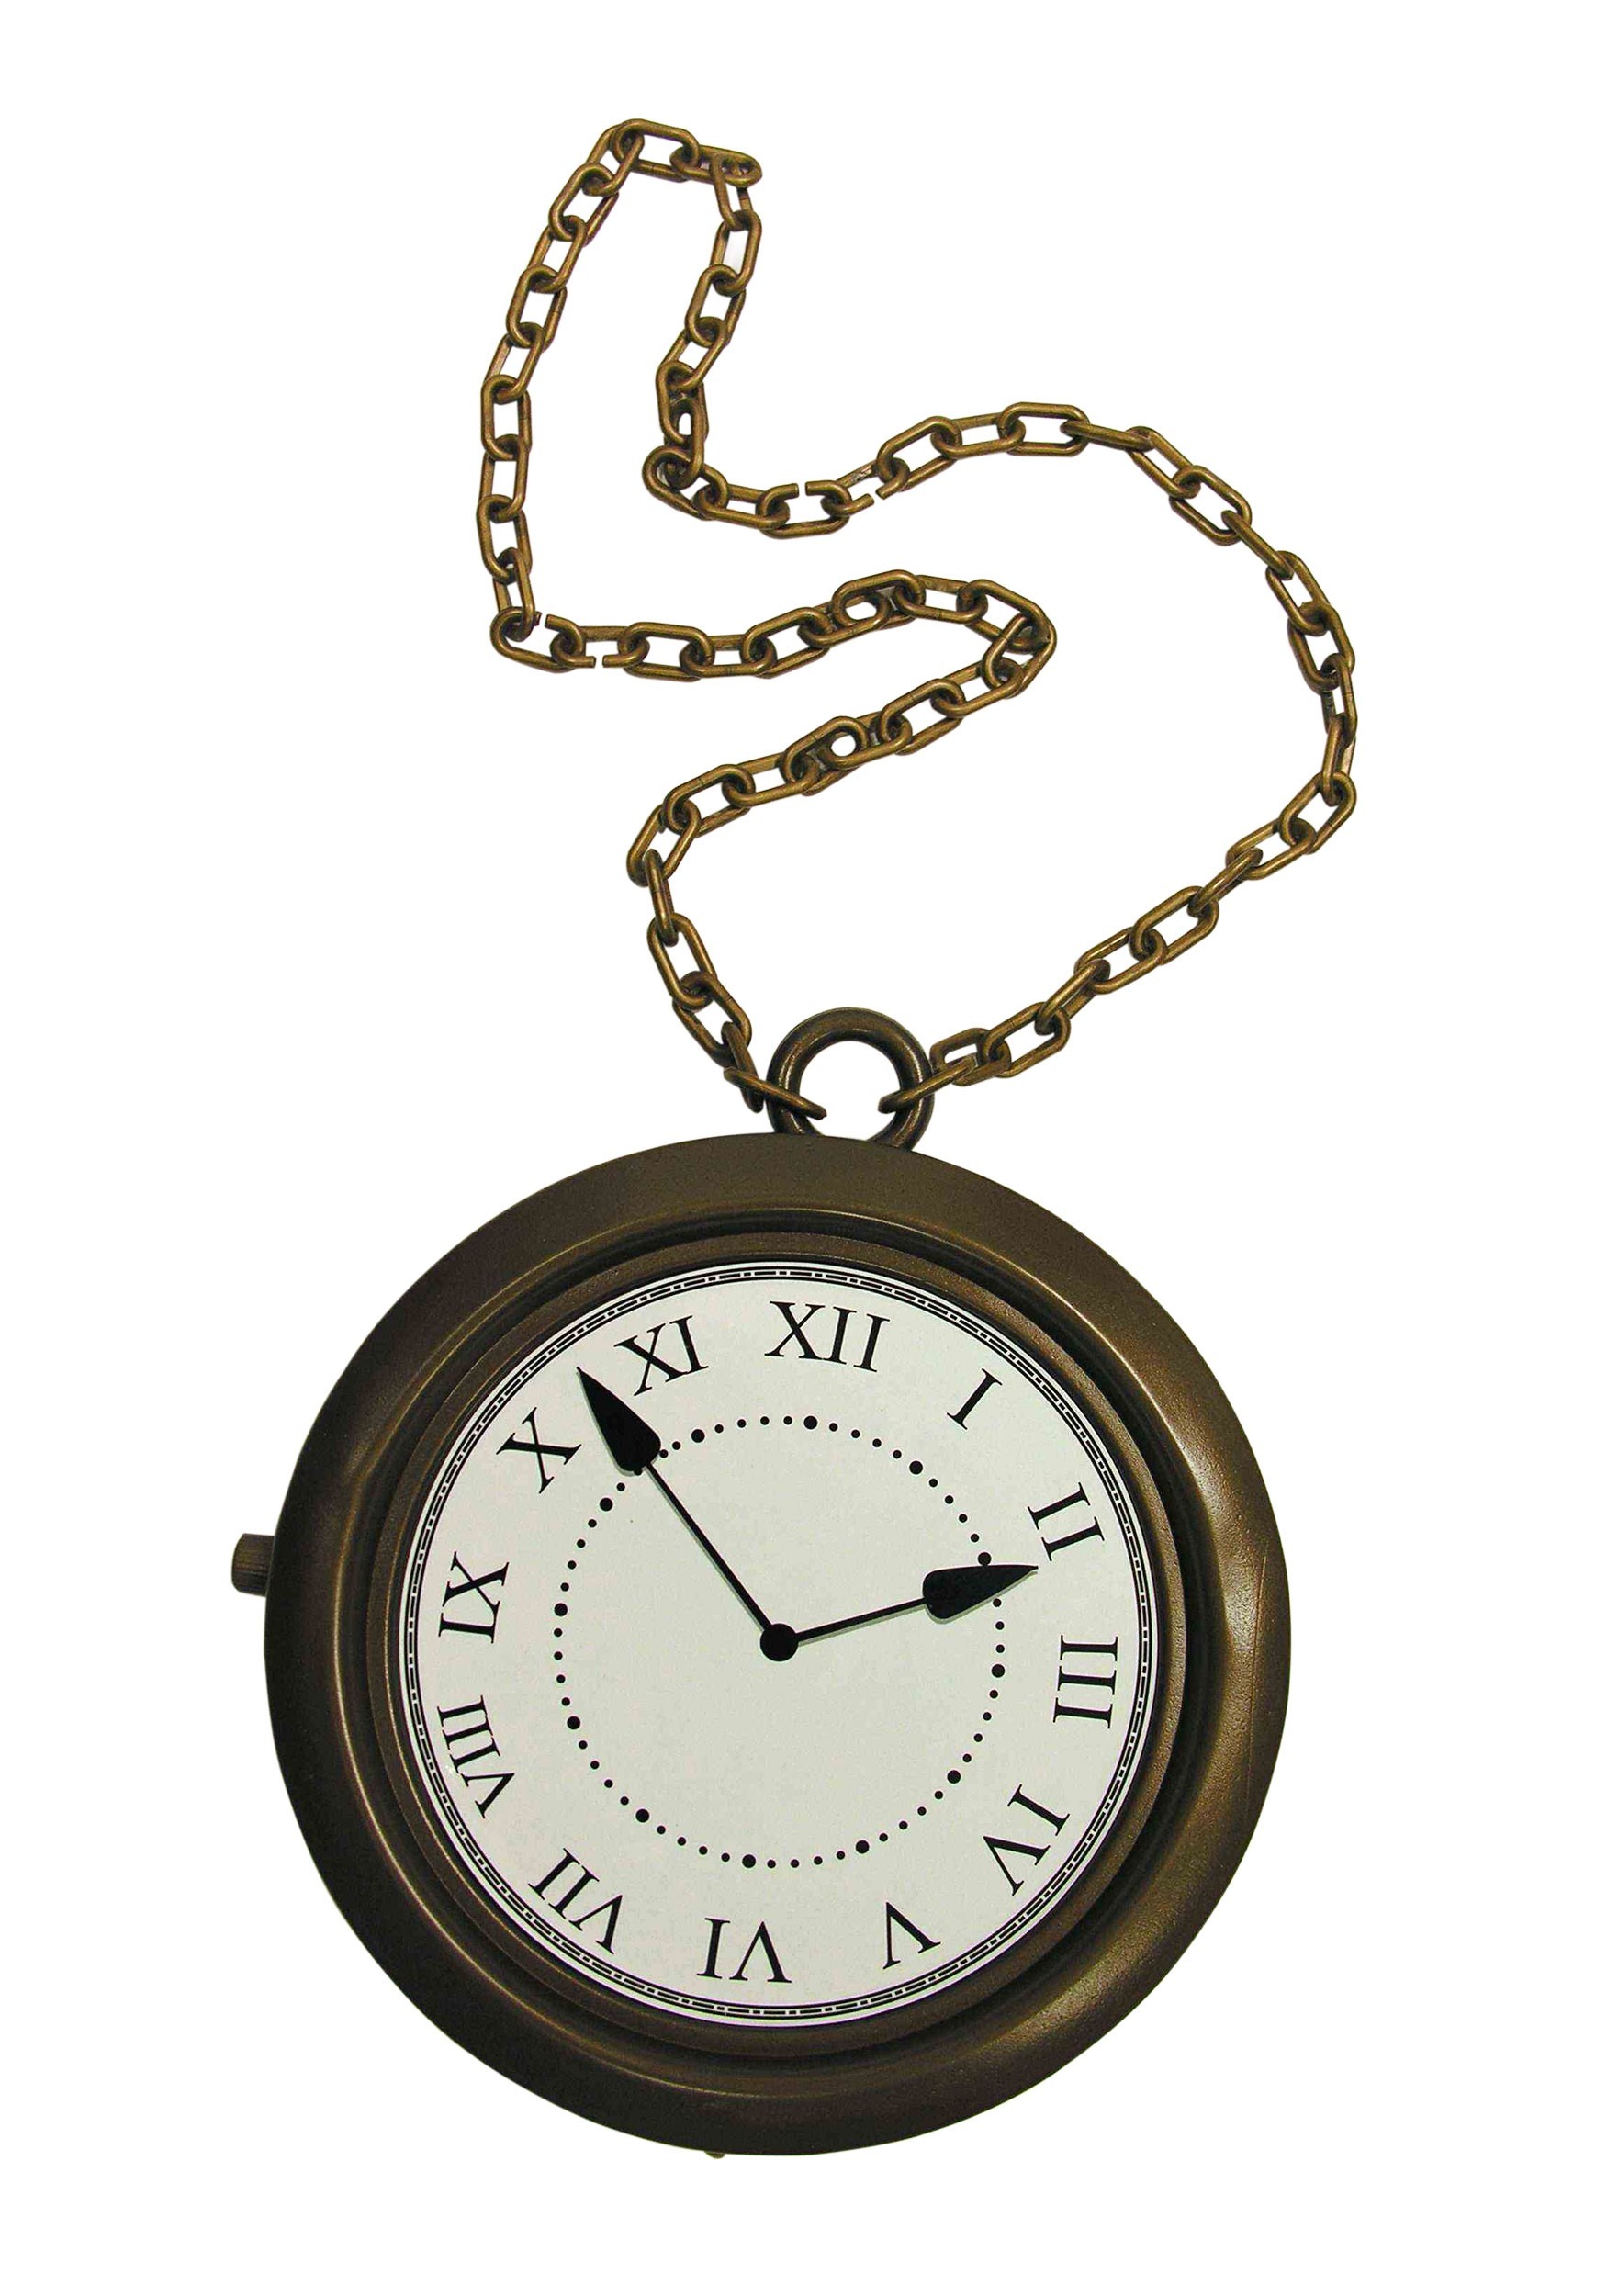 https://images.halloweencostumes.com/products/3852/1-1/clock-necklace-update-main.jpg